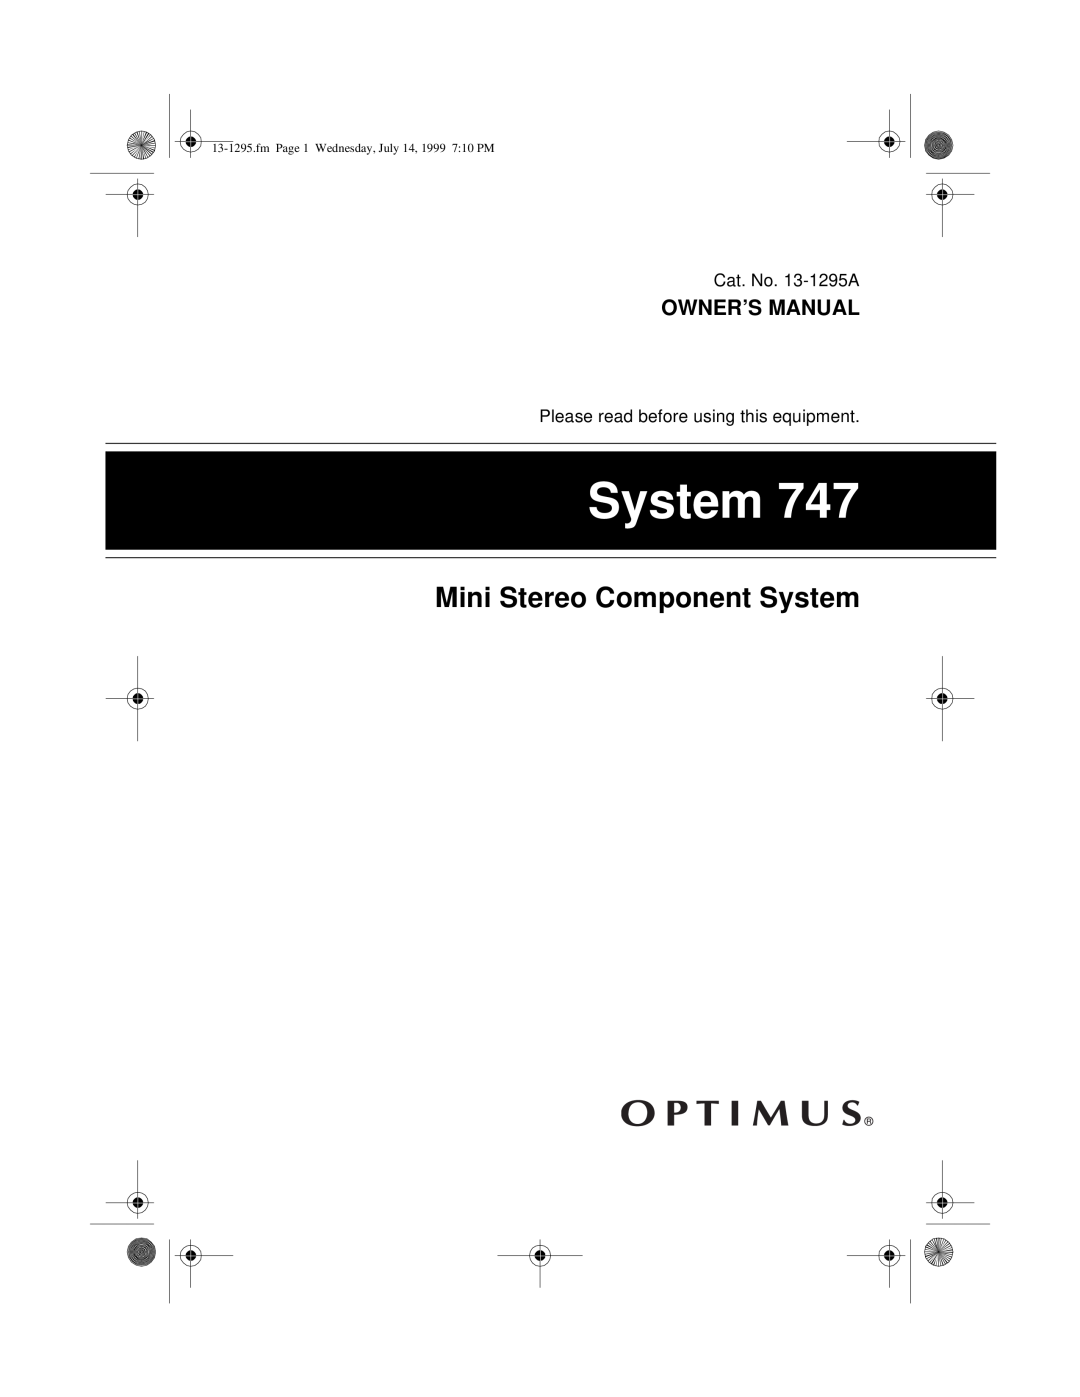 Optimus SYSTEM 747 owner manual Mini Stereo Component System, fmPage 1 Wednesday, July 14, 1999 7 10 PM 